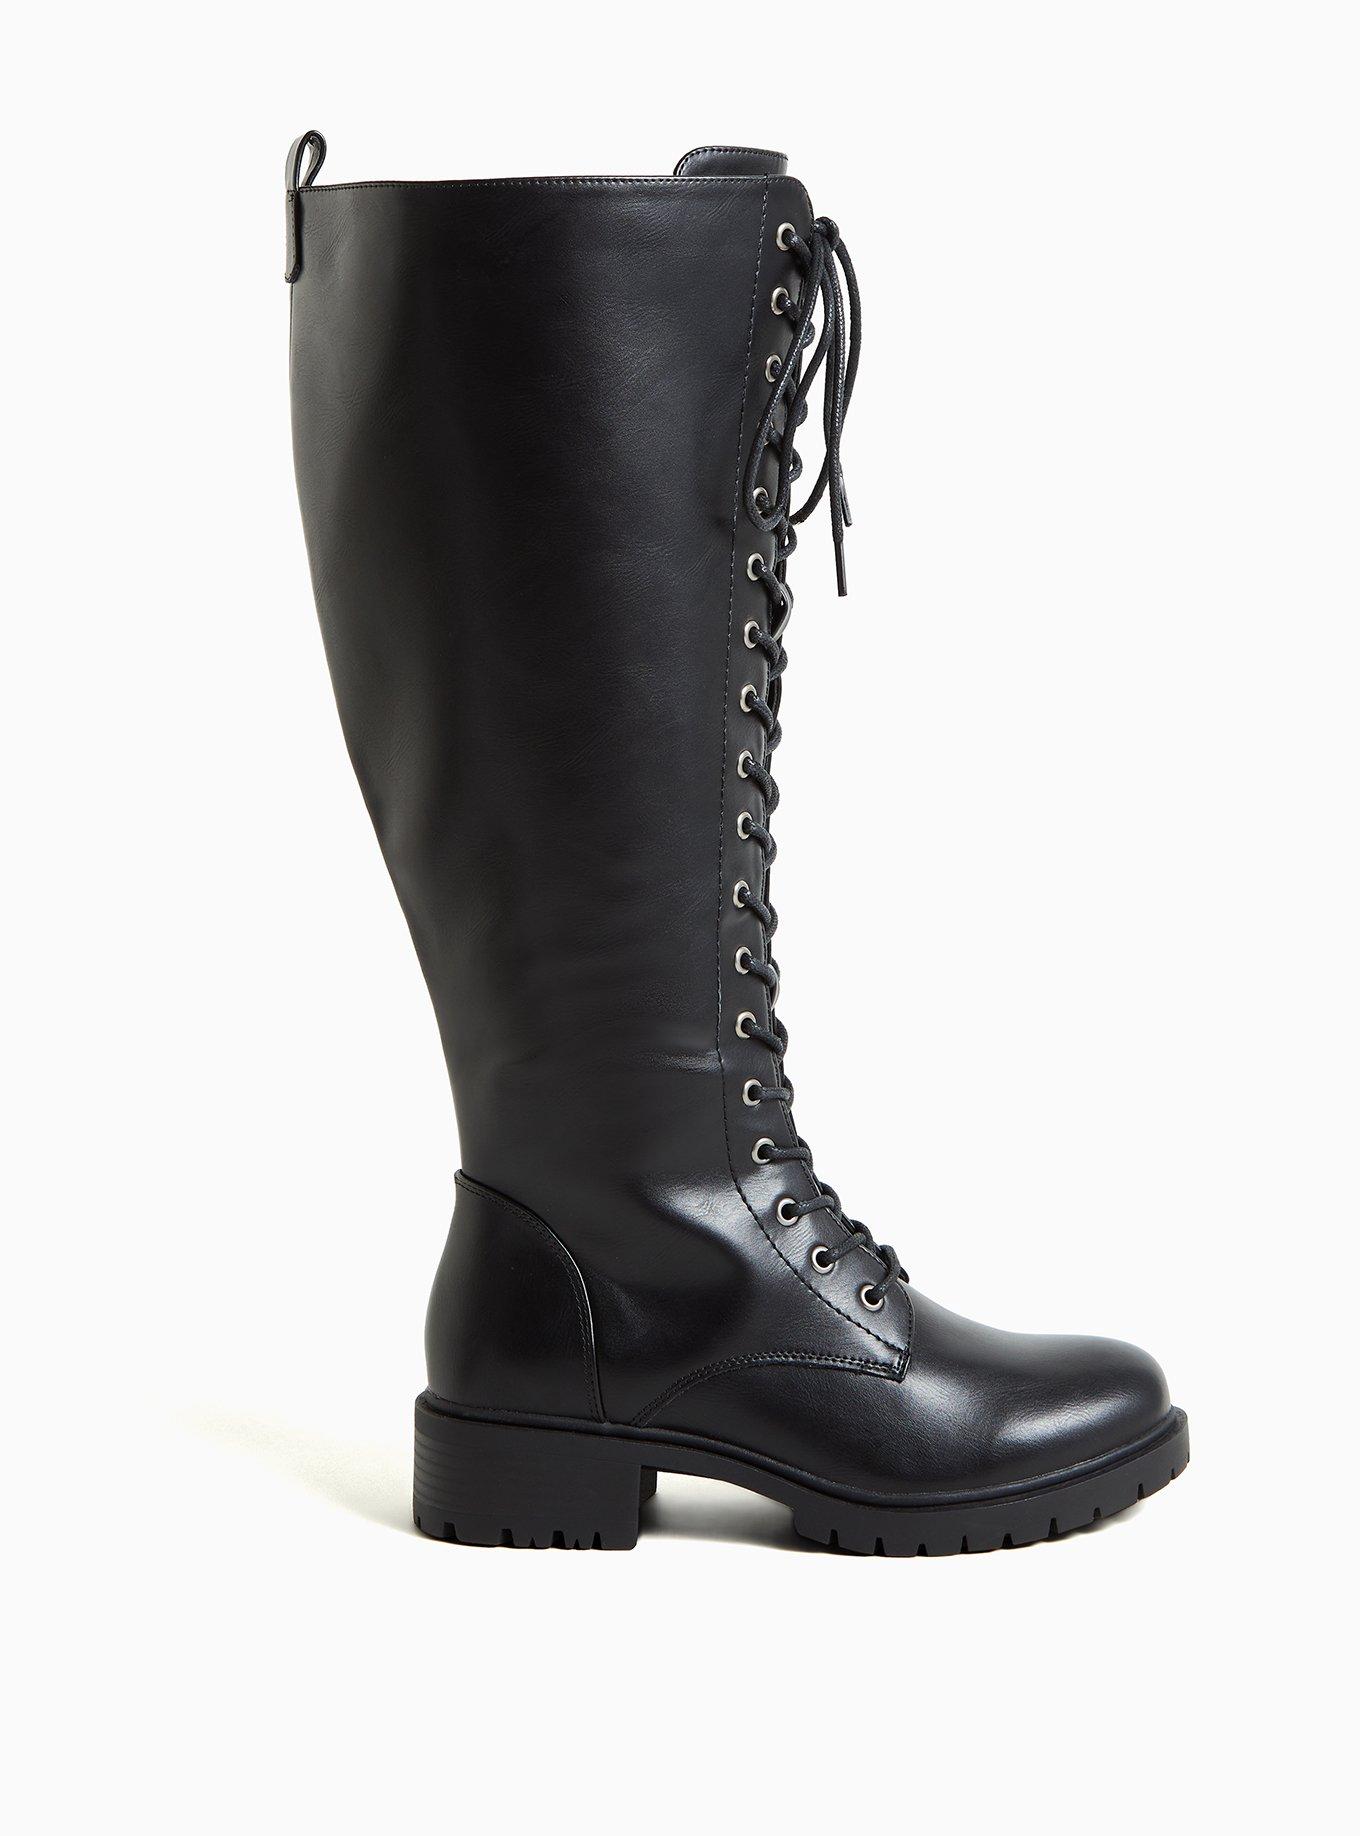 Plus Size - Black Faux Leather Lace-Up Knee-High Combat Boot (WW) - Torrid